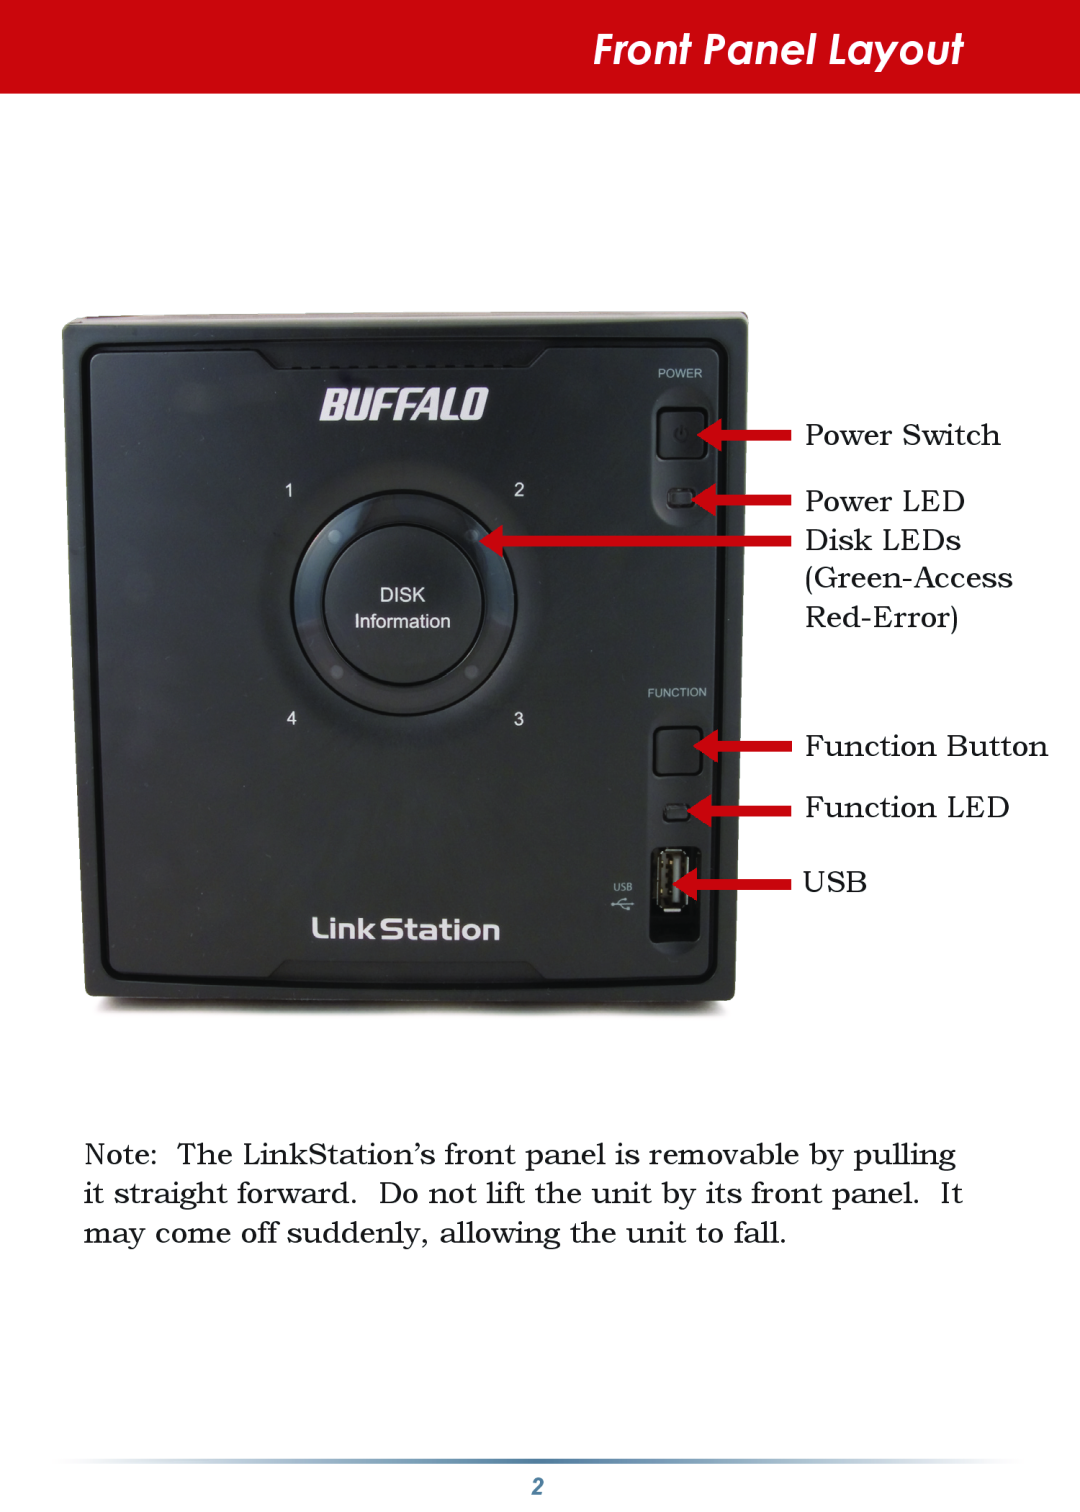 Buffalo Technology LS-QL/R5 setup guide Front Panel Layout, Power Switch Power LED Disk LEDs Green-Access Red-Error 